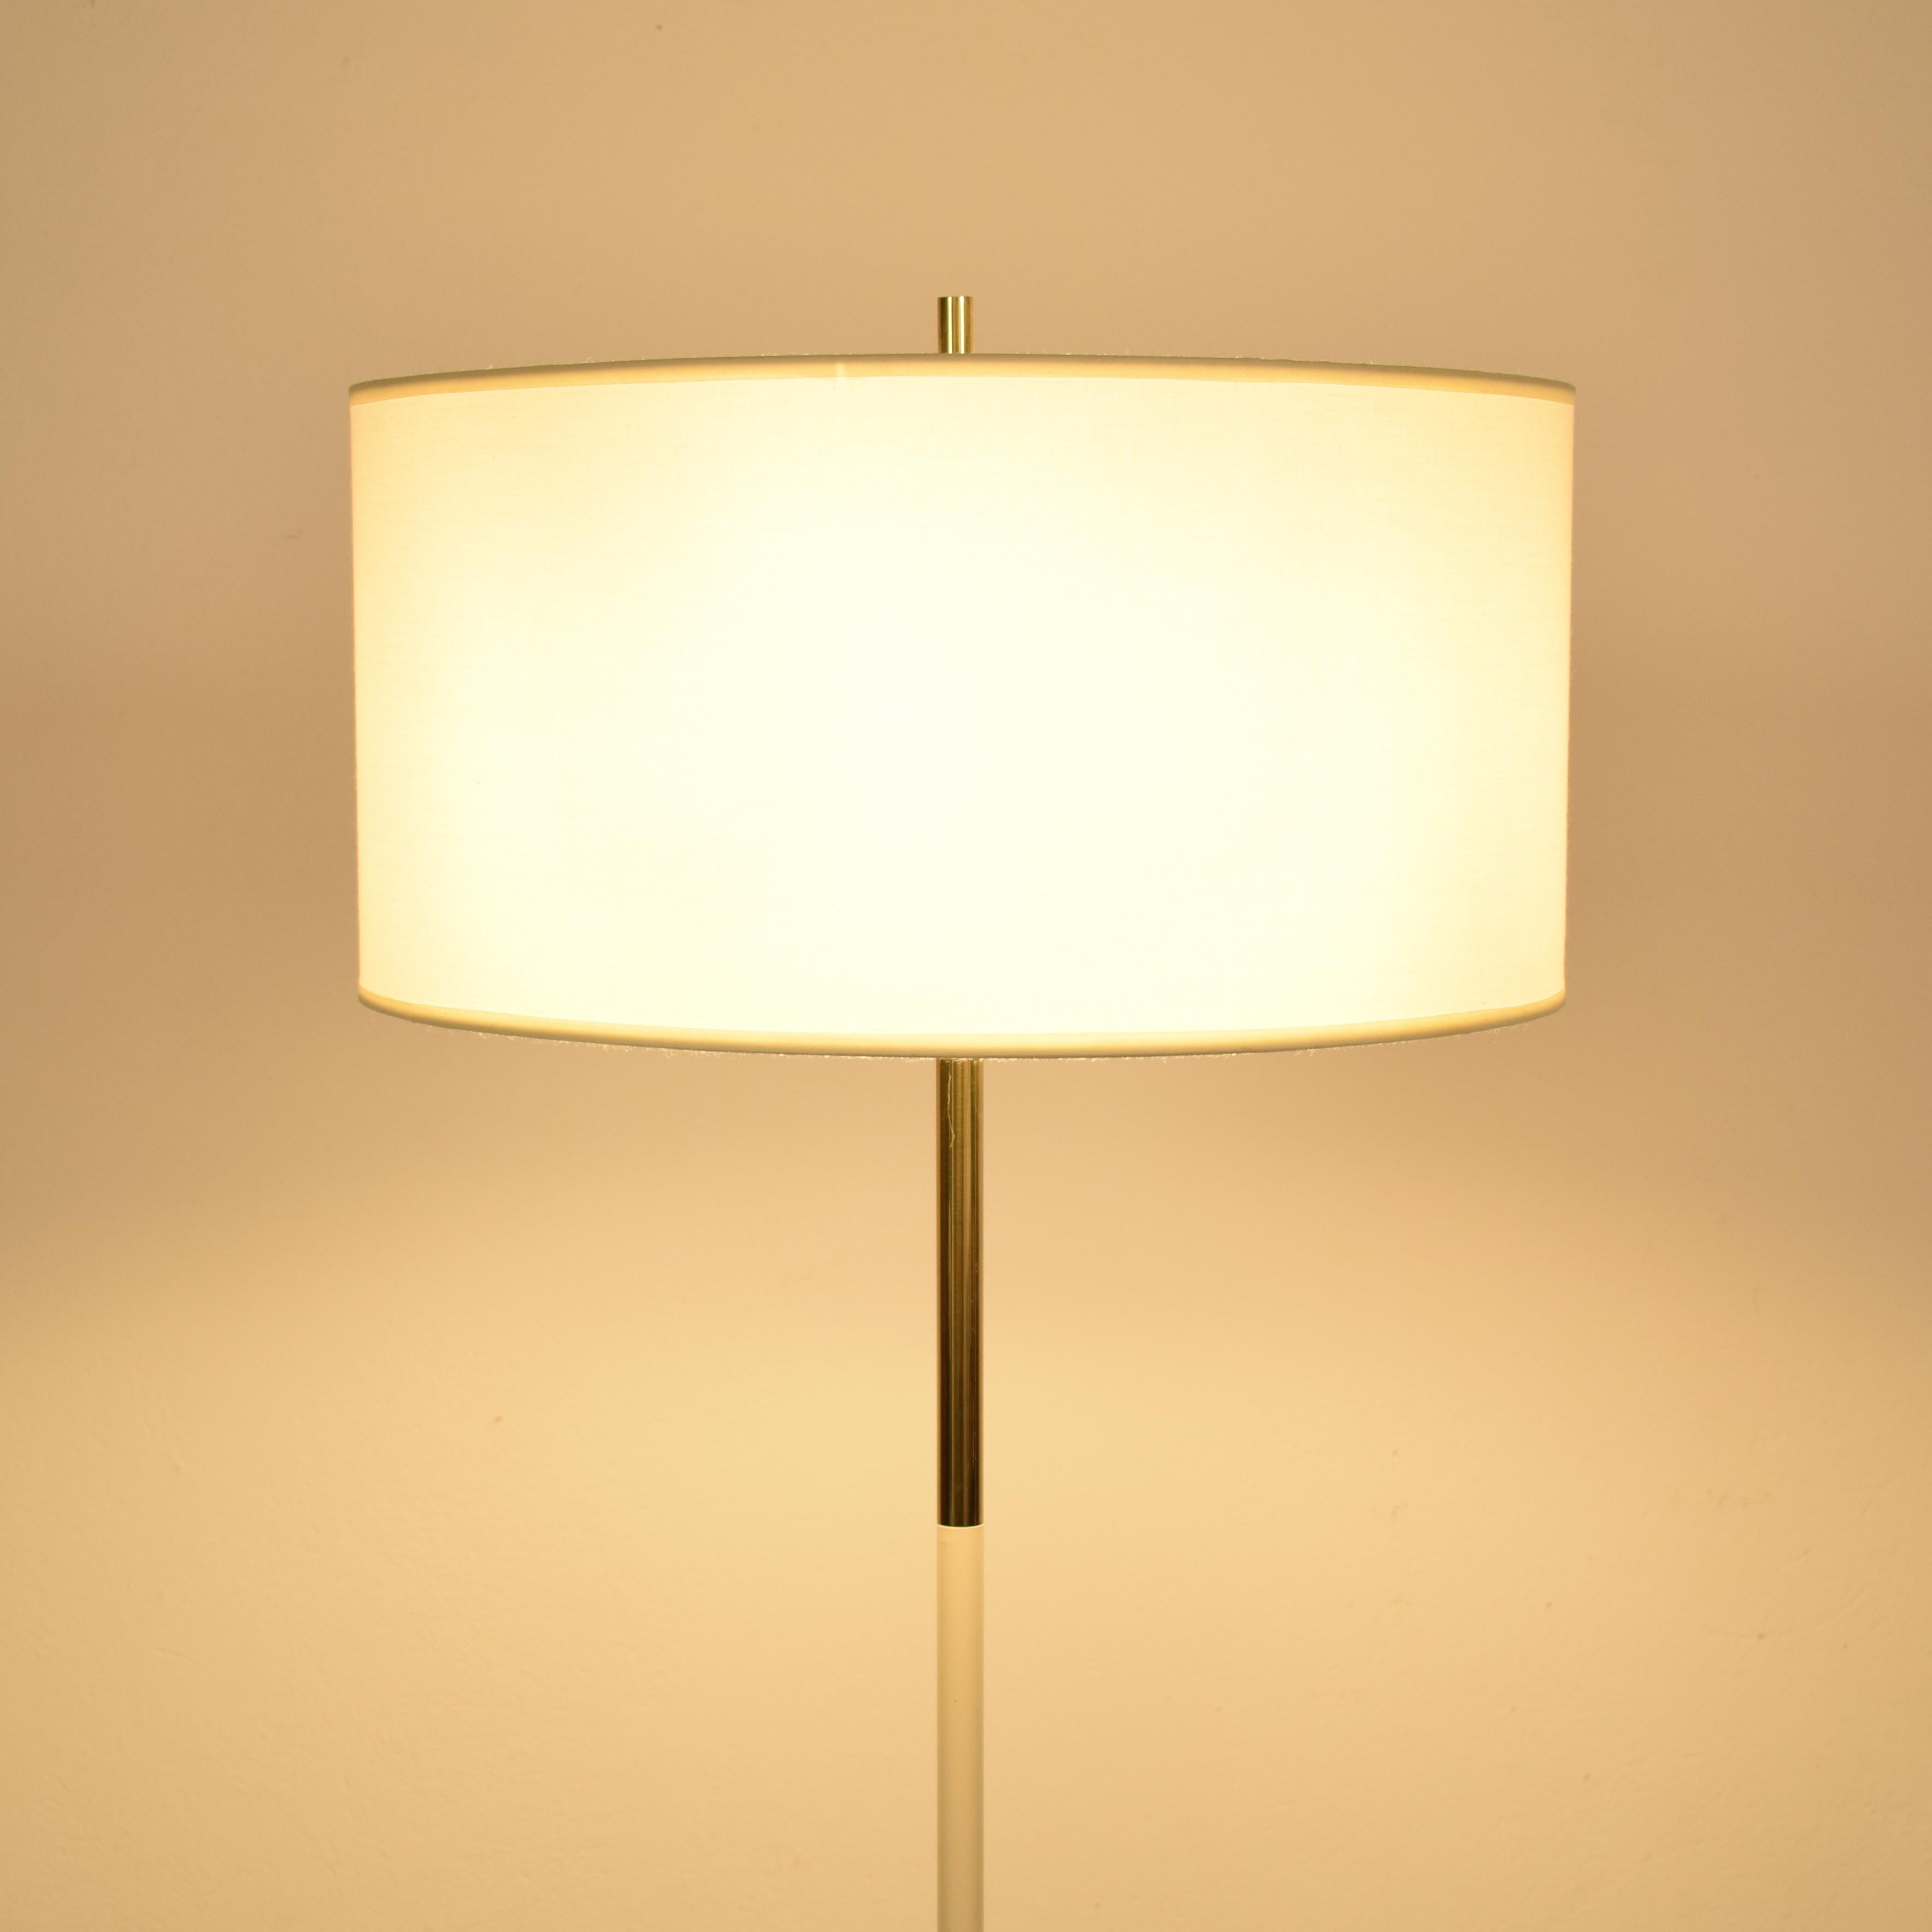 Late 20th Century Midcentury Brass and Lacquered Metal Floor Lamp